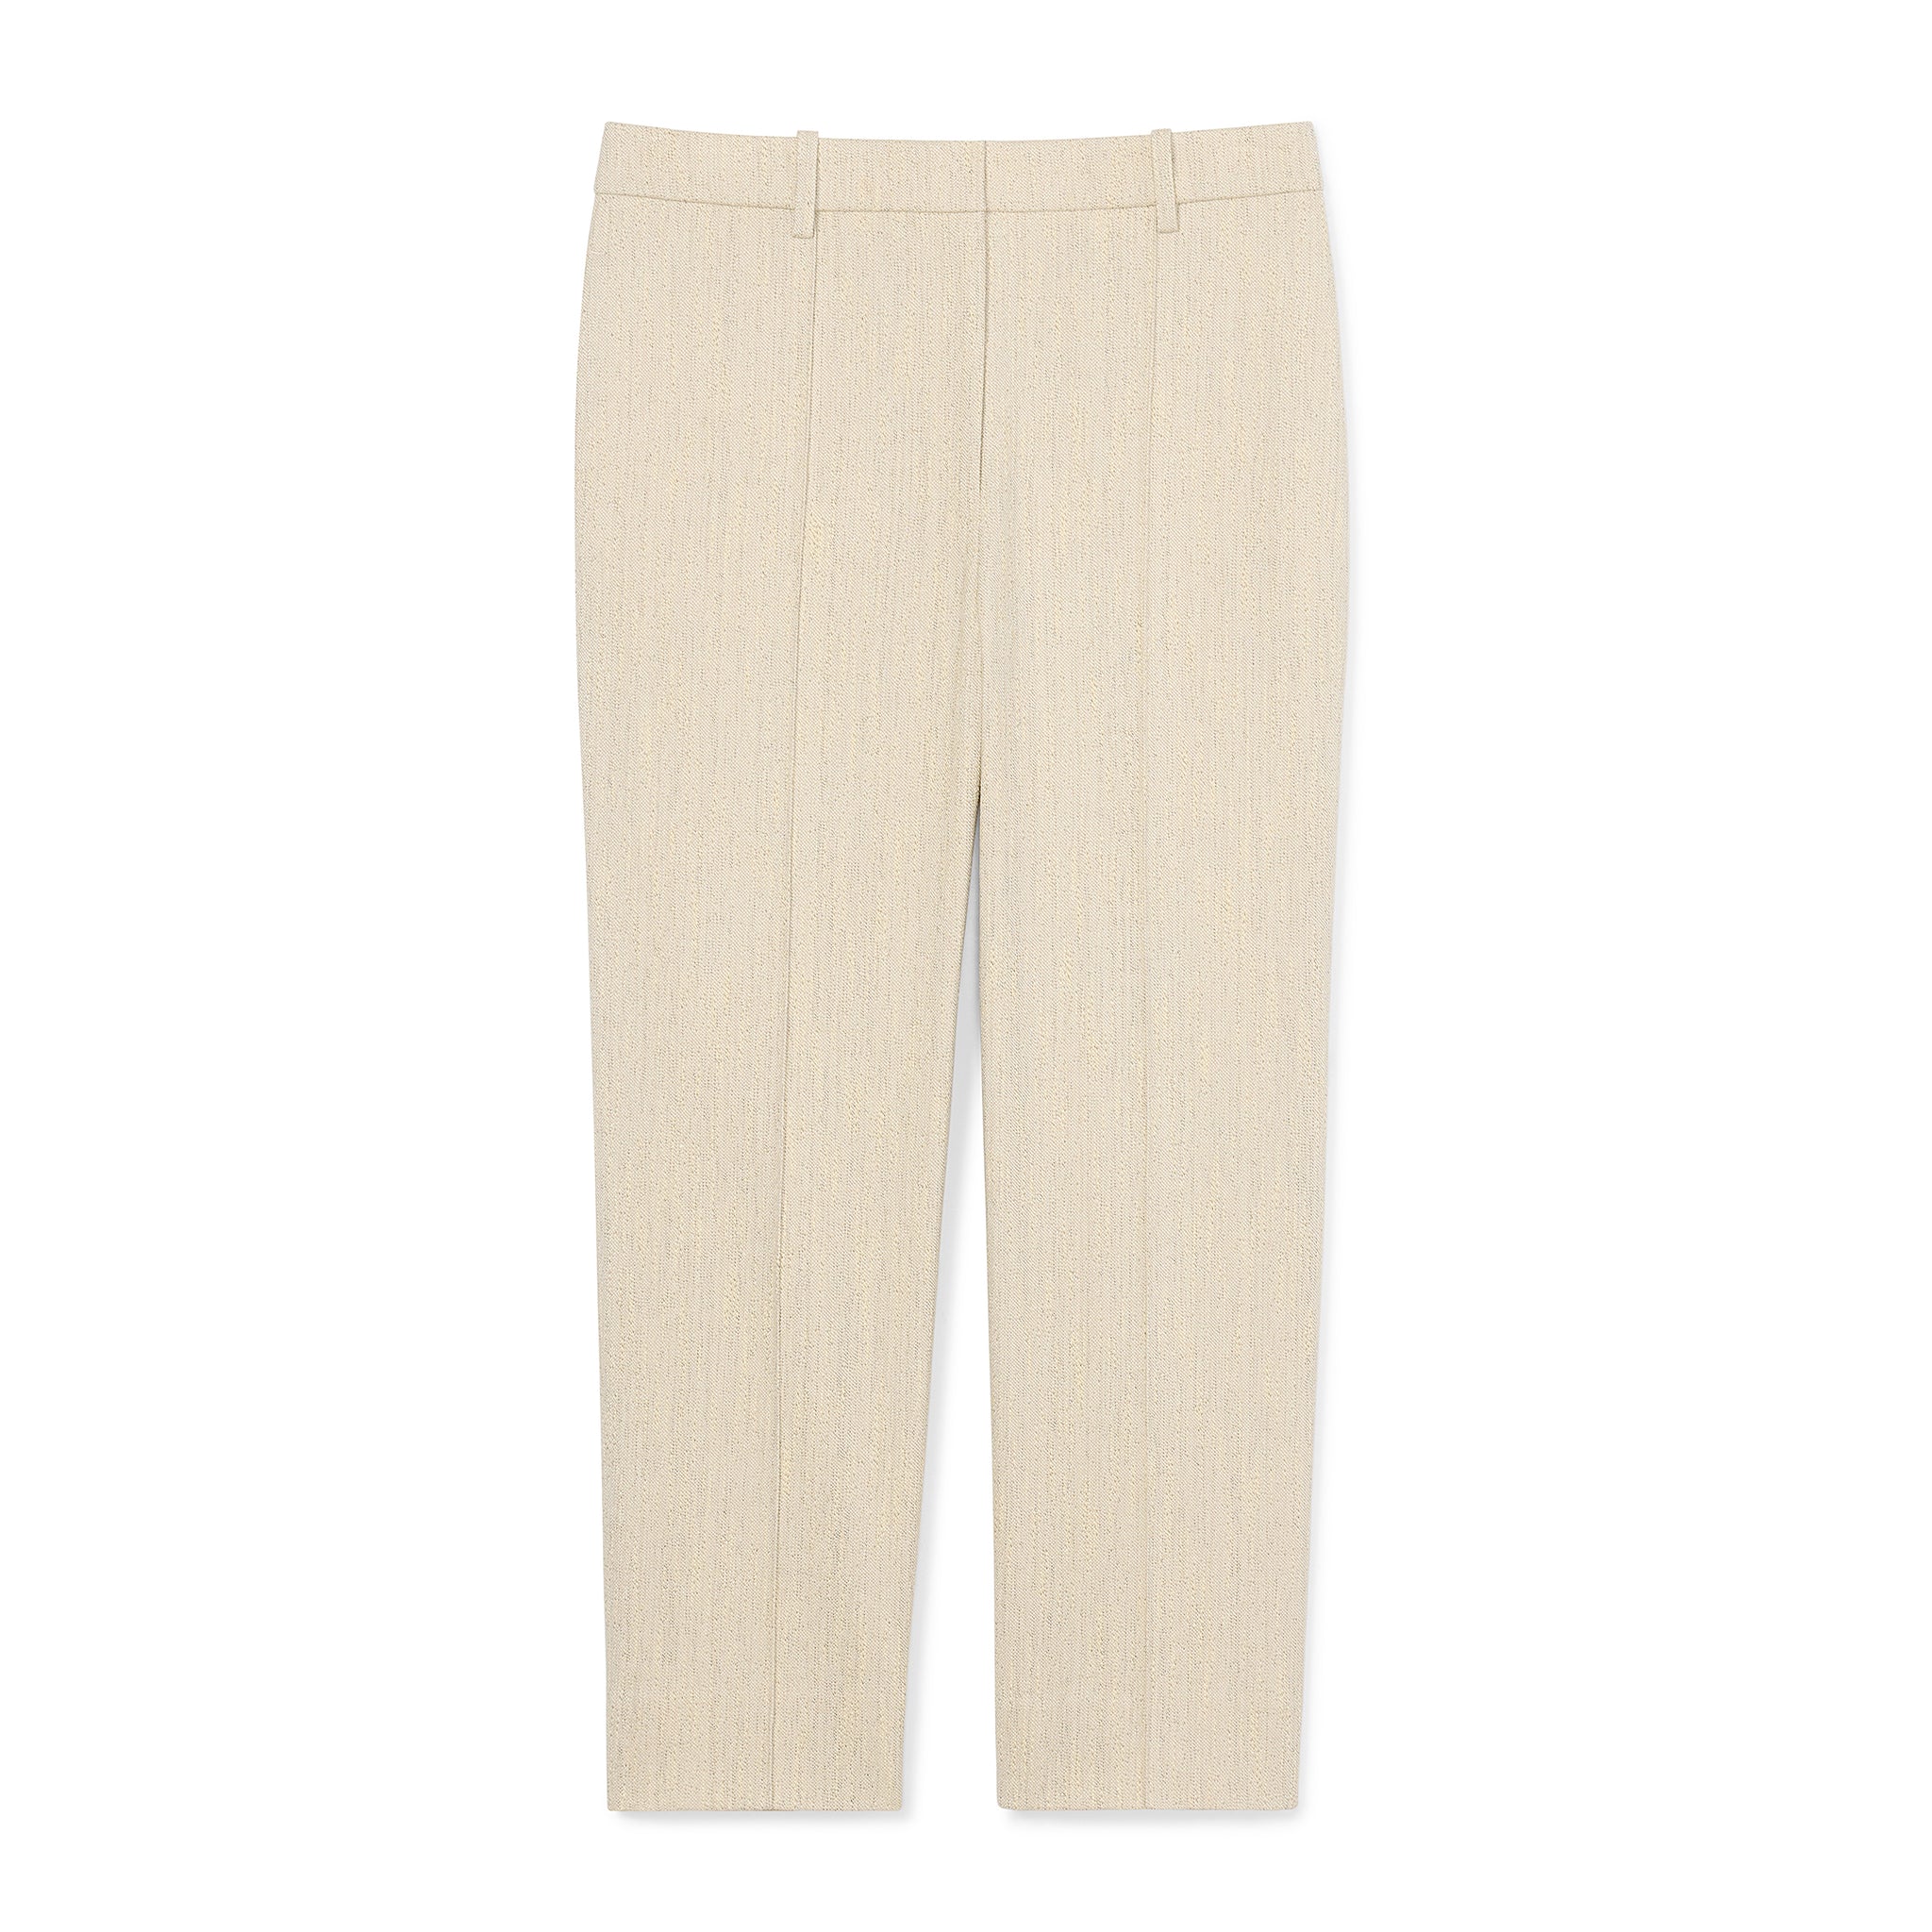 packshot image of the pearl pant in ivory